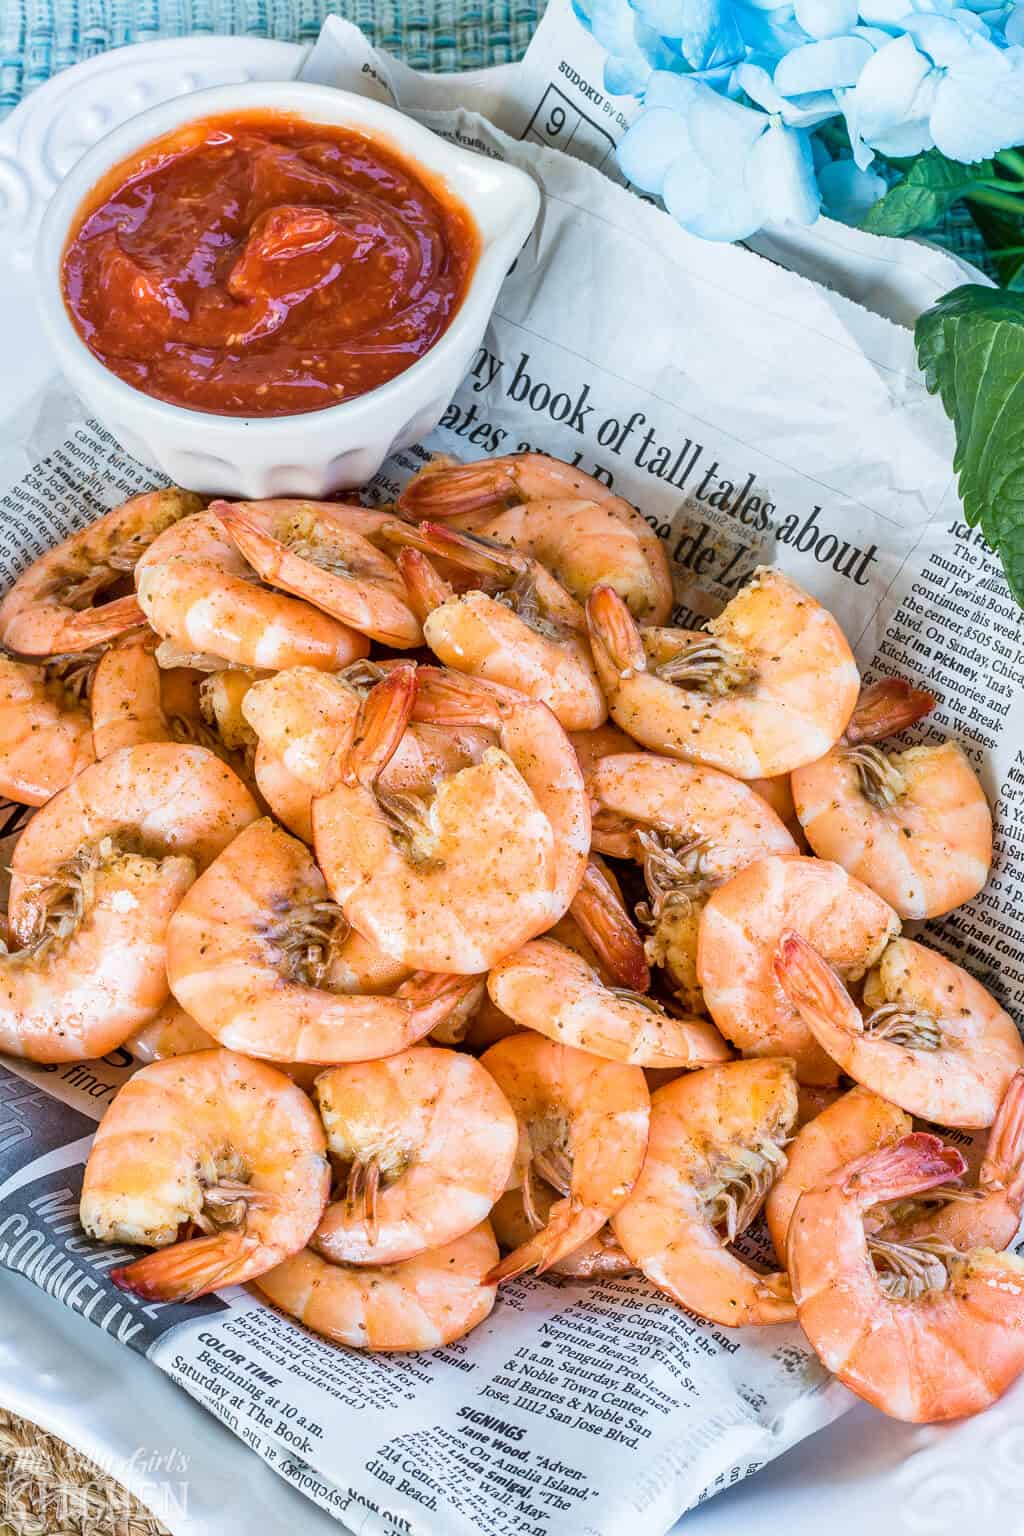 Peel and Eat Shrimp Cocktail, boiled in a rich beer stock makes this one super flavorful shrimp cocktail! #Recipe from ThisSillyGirlsKitchen.com #shrimp #shrimpcocktail #cocktailsauce